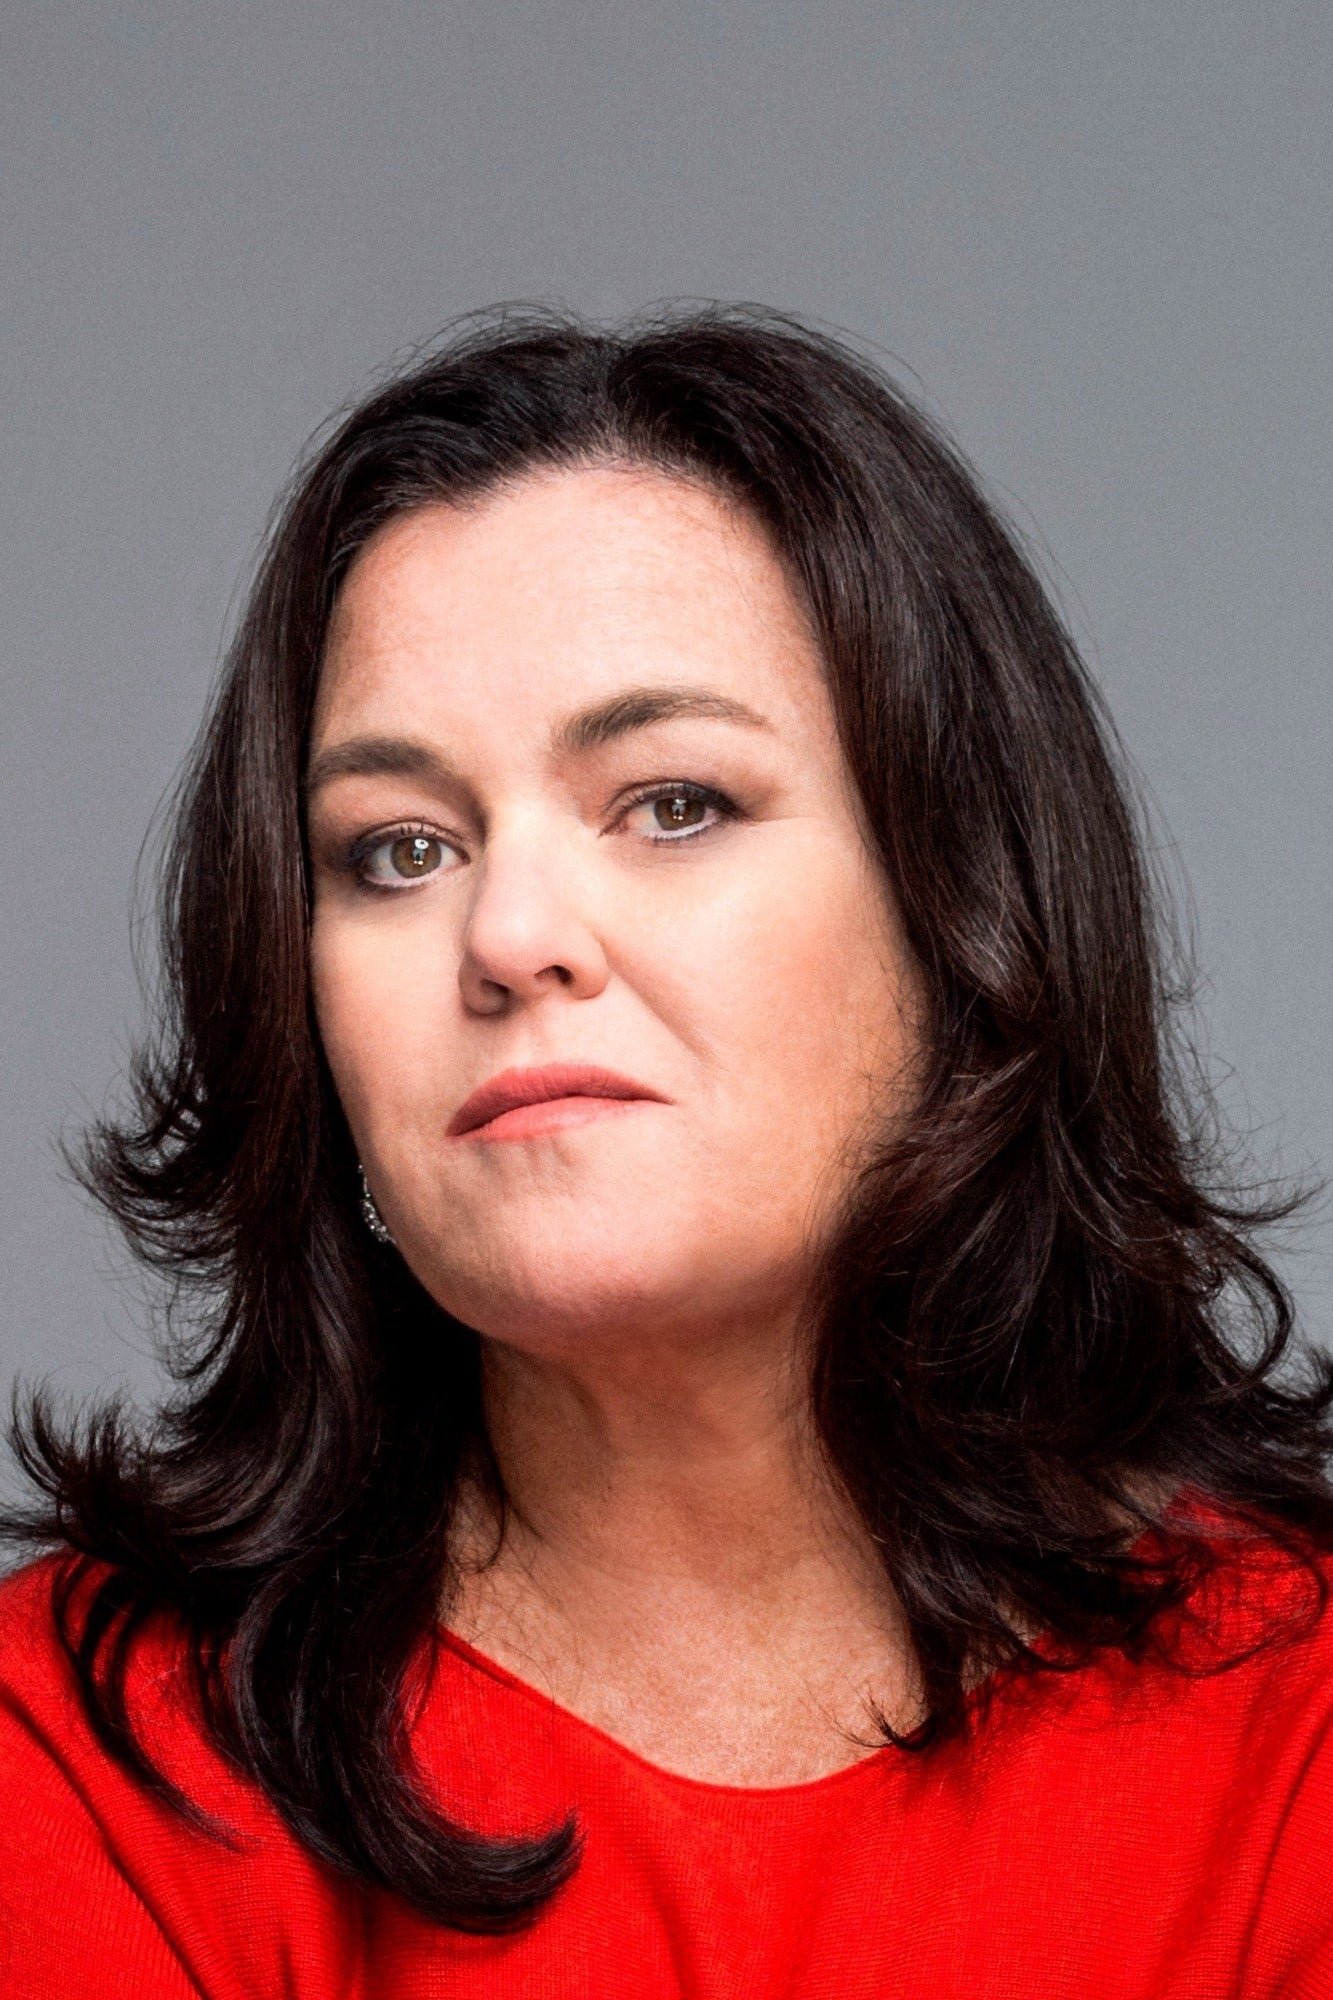 Rosie O'Donnell image